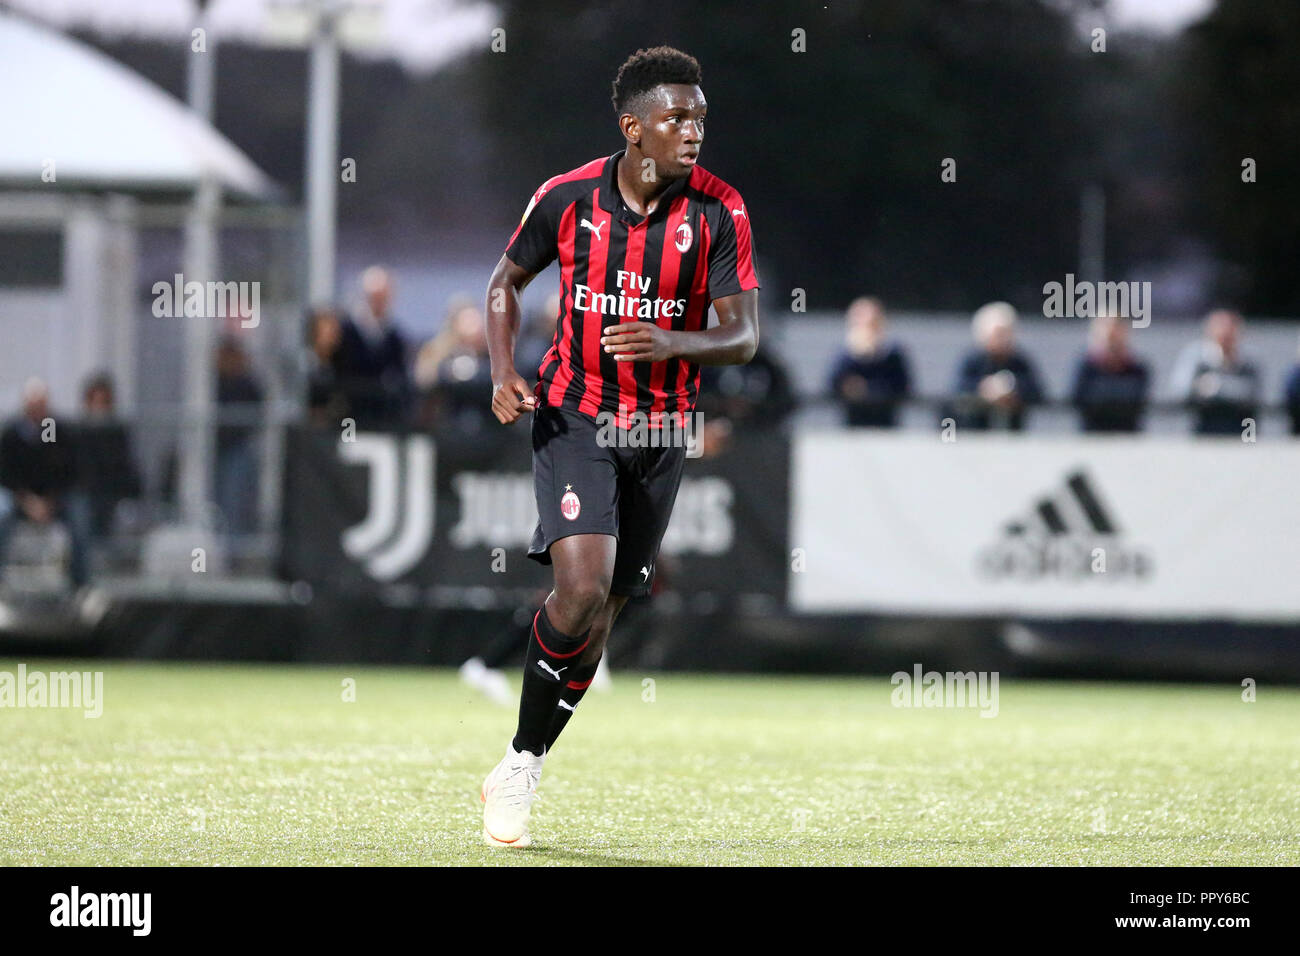 Vinovo, Italy. 28th September 2018. Frank Tsadjout of Ac Milan U19 in  action during the Serie A primavera football match between Juventus FC U19  and Ac Milan U19. Credit: Marco Canoniero/Alamy Live